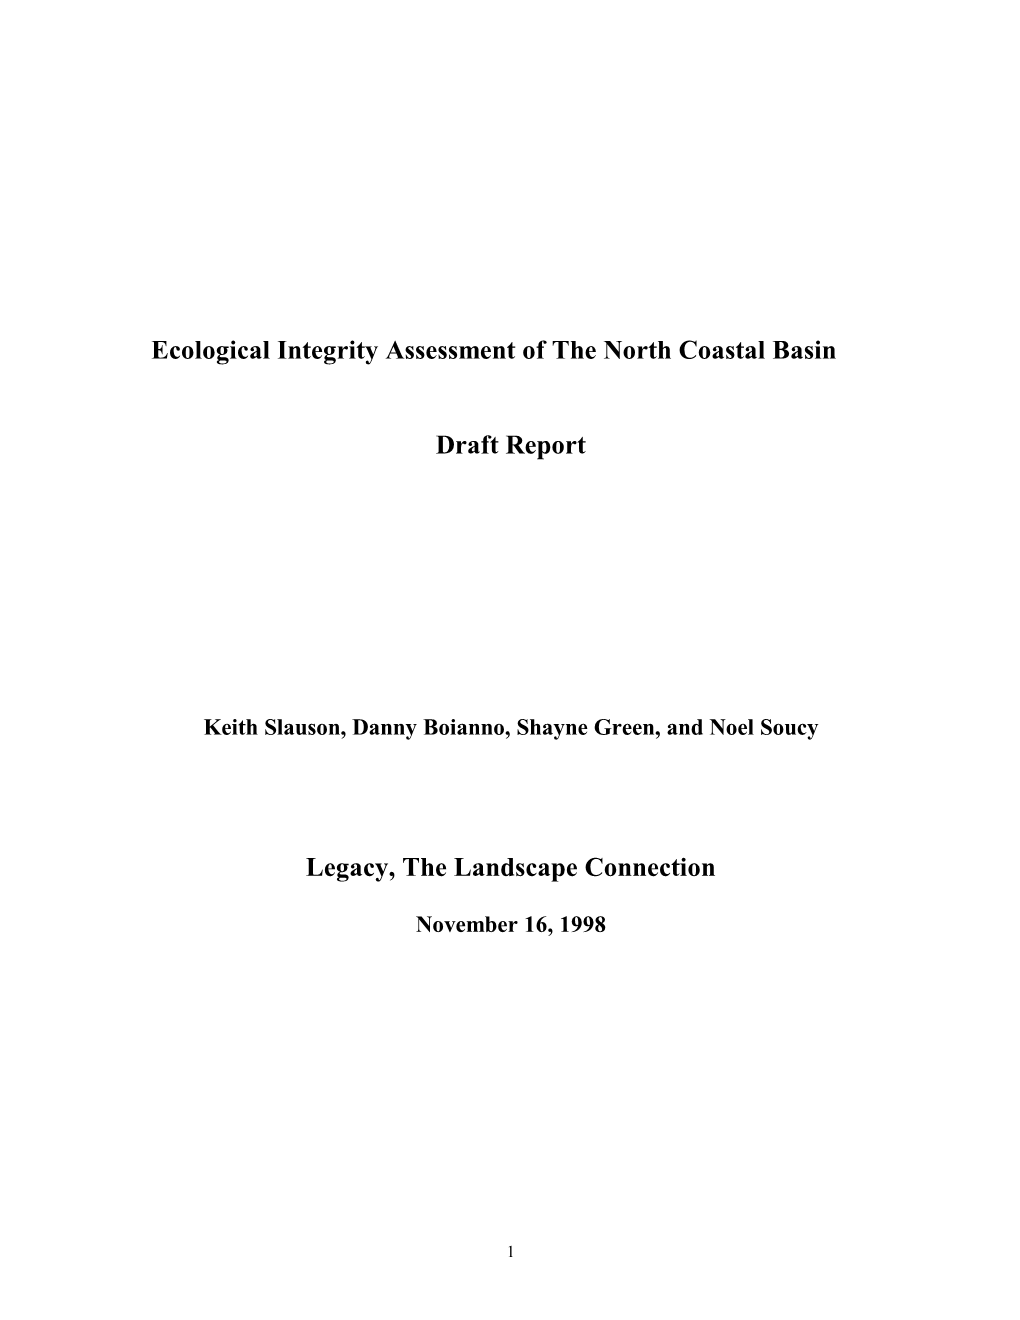 Ecological Integrity Assessment of the North Coastal Basin